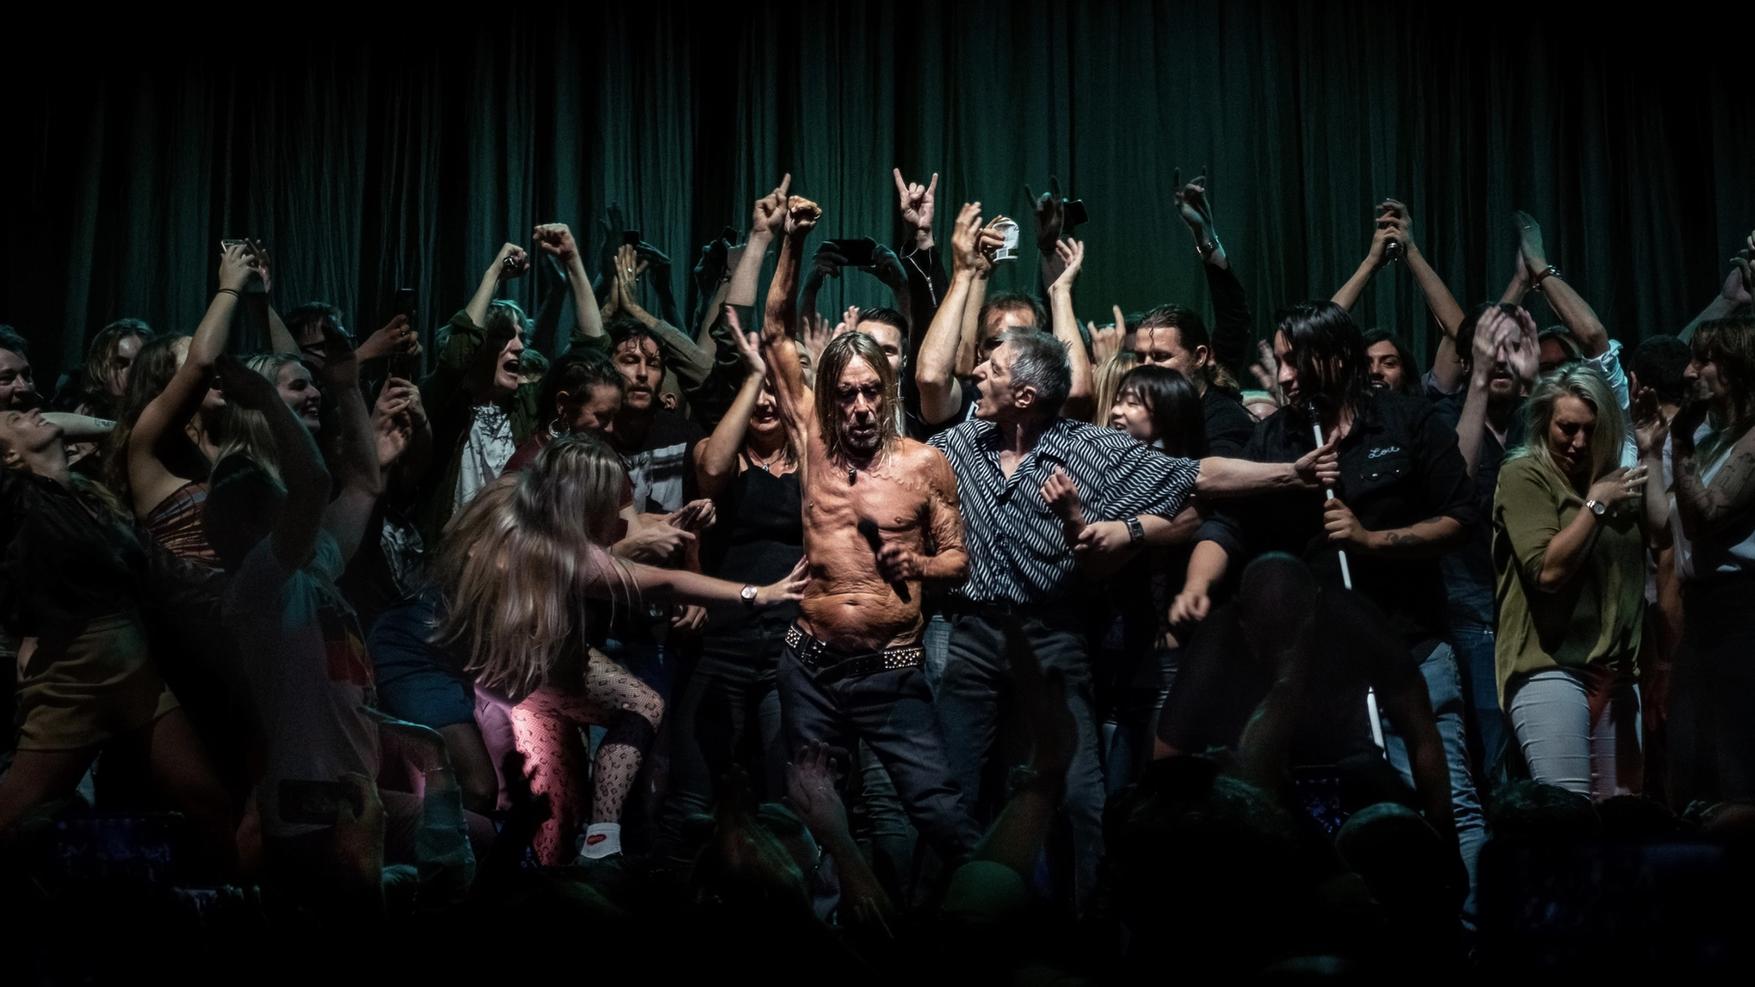 Iggy Pop surrounded by many people dancing